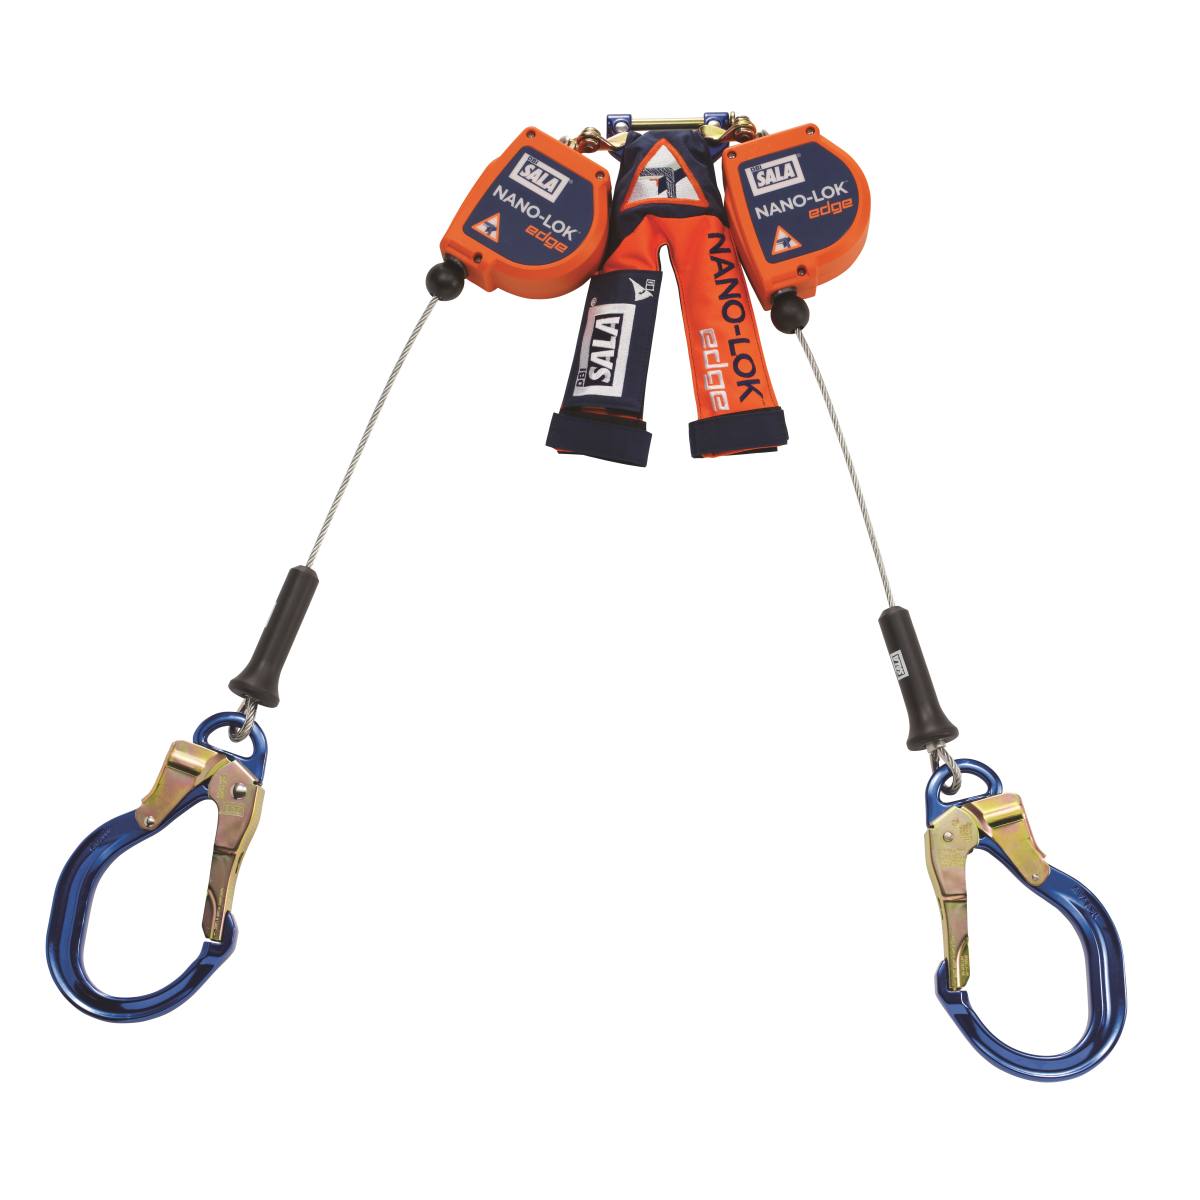 3M DBI-SALA Nano-Lok Edge twin retractable type fall arrester, sharp-edge tested, length: 2.5 m, galvanised wire rope 5 mm, Trilock webbing carabiner, 2 aluminium scaffold carabiners opening width 63 mm, 3M Connected Safety-ready RFID tag for inspect